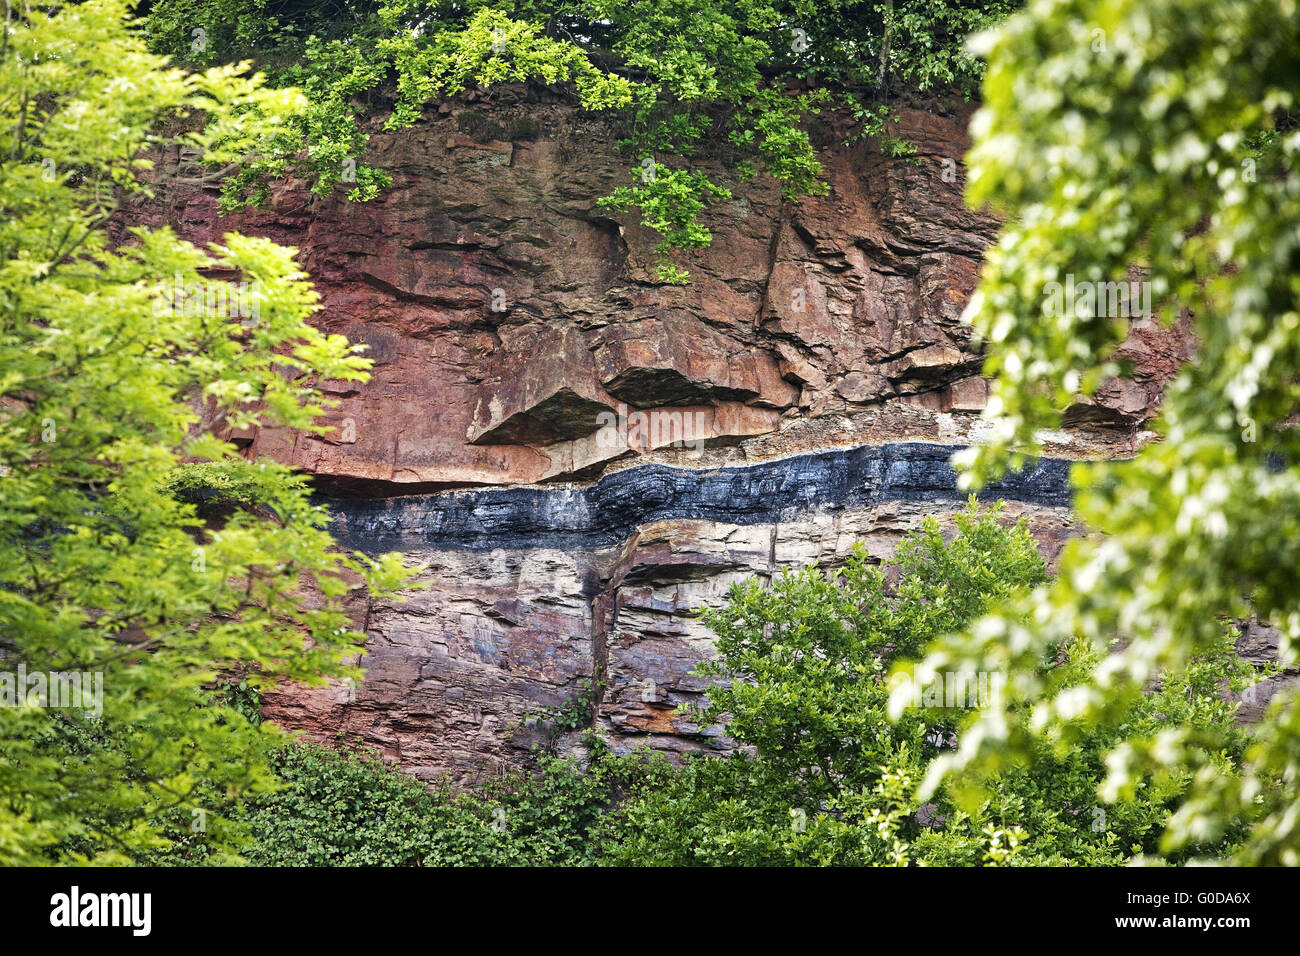 Geological outcrop with overground coal seam Stock Photo